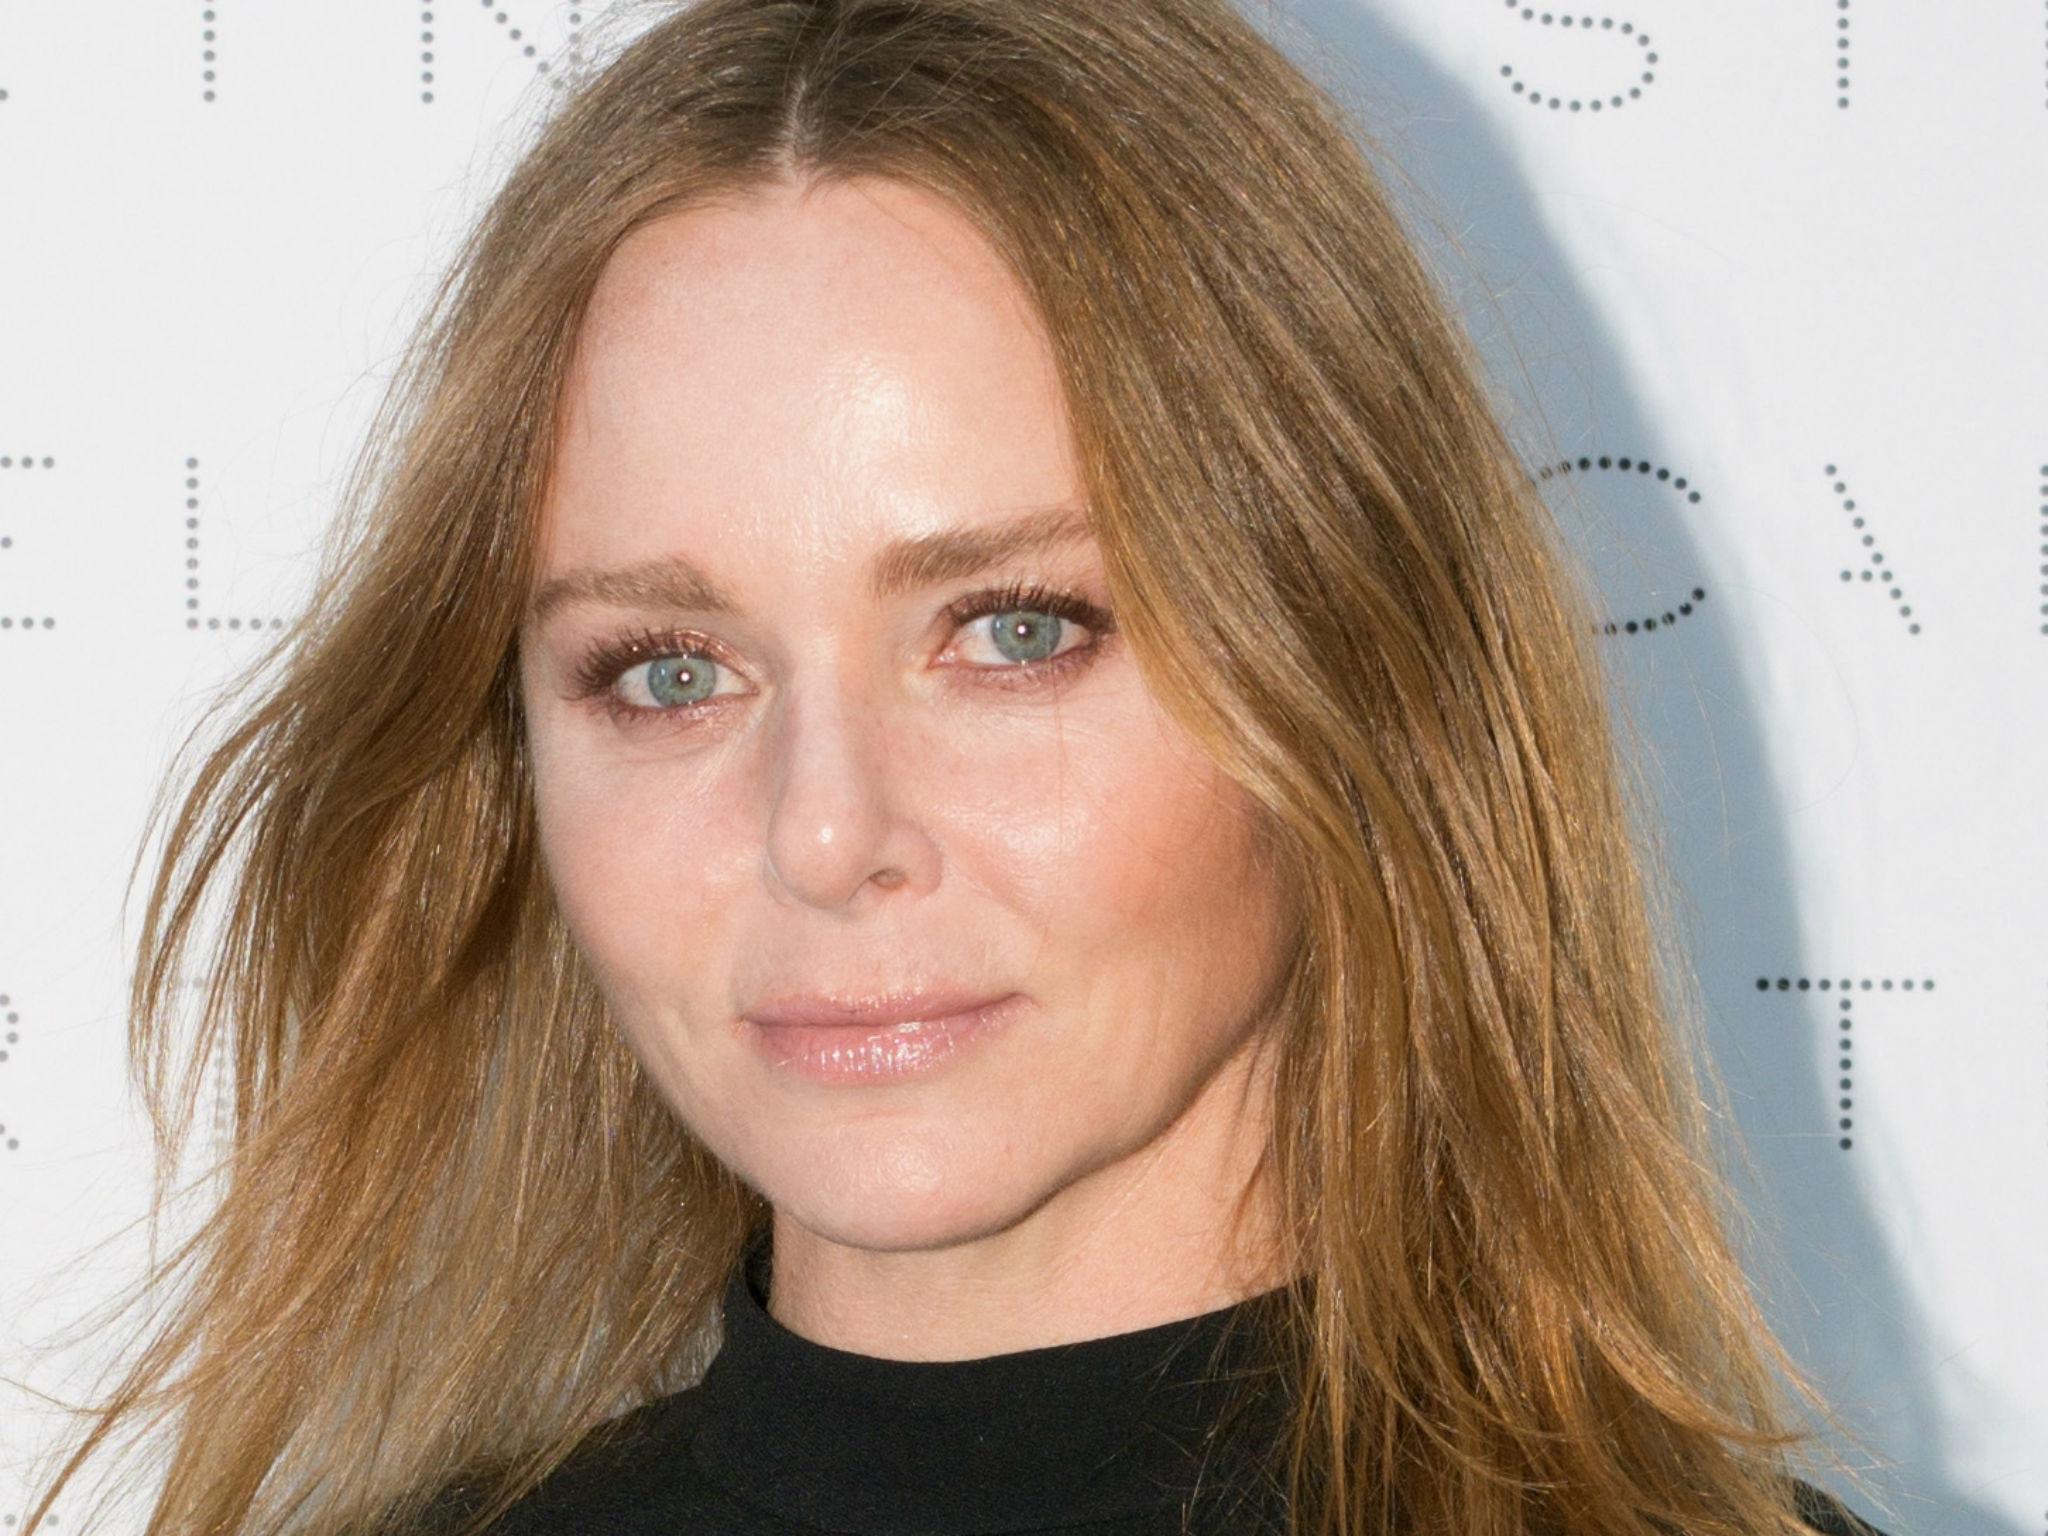 Stella McCartney: Daily Mail criticised by own readers for article